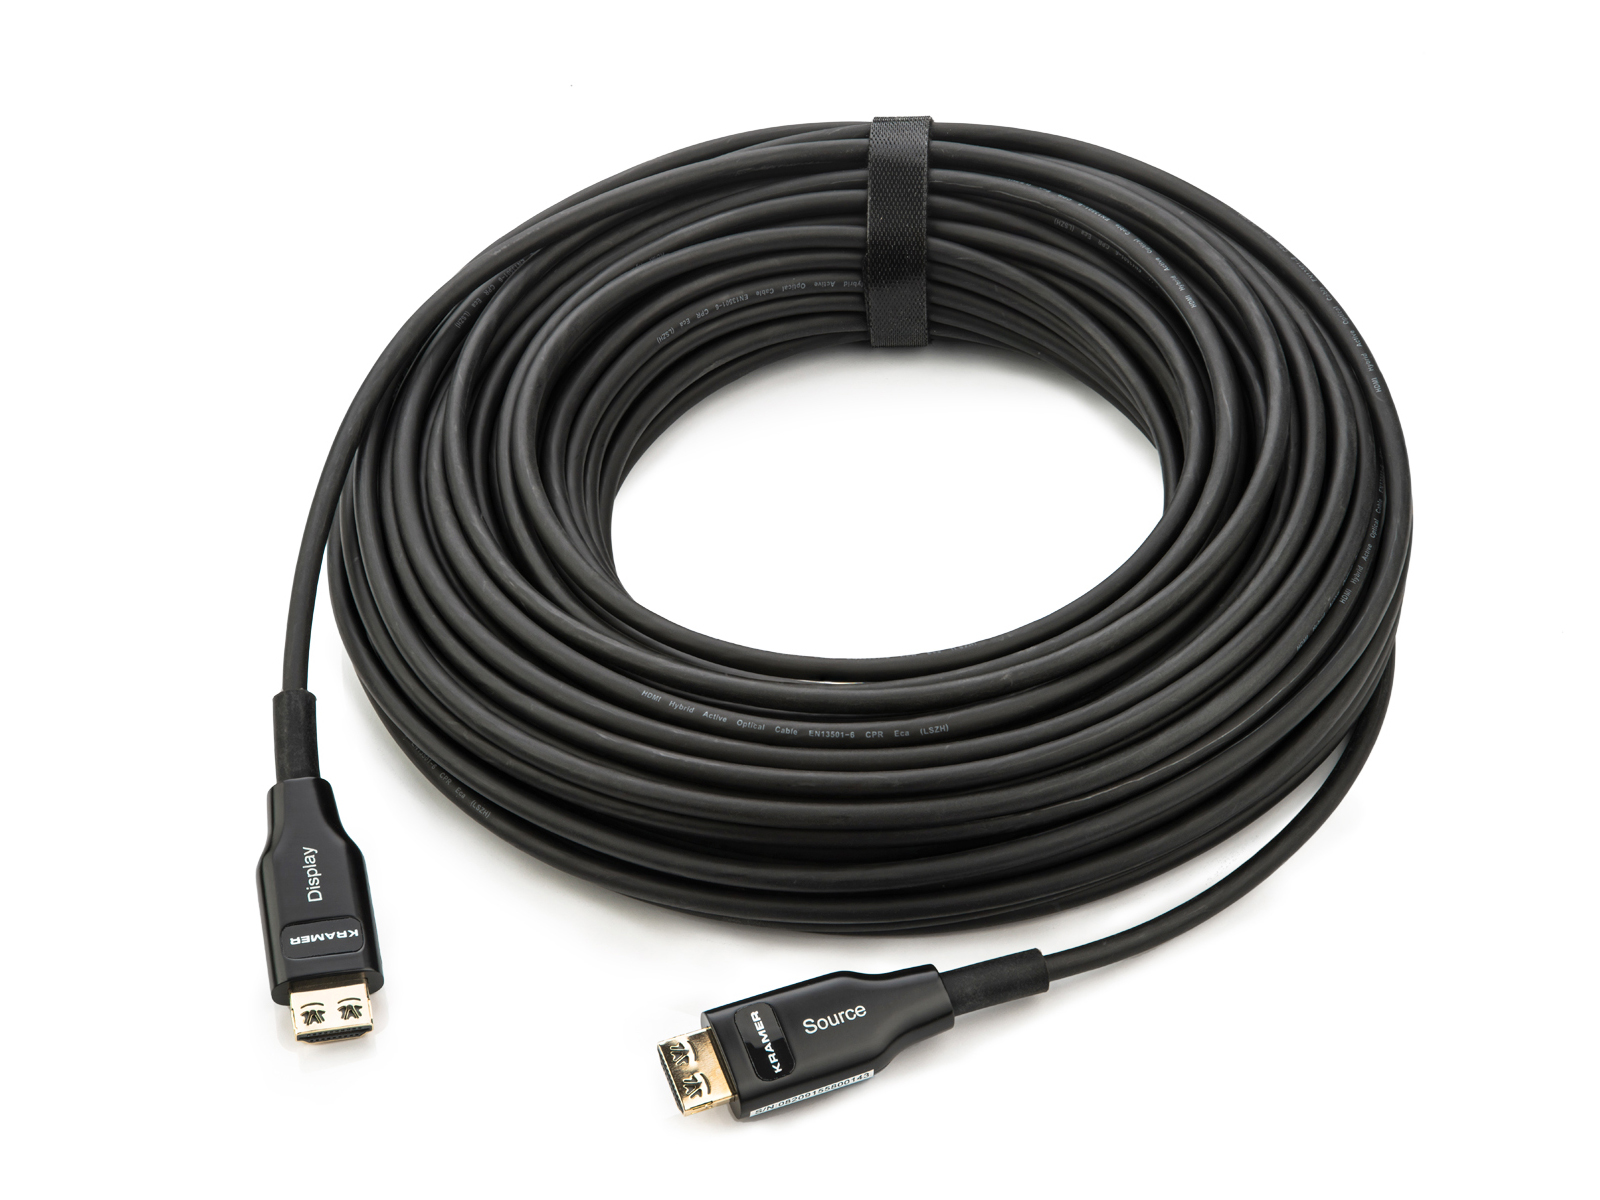 CP-AOCH/60F-164 50m/164ft High-Speed HDMI Optic Hybrid Cable - Plenum Rated by Kramer